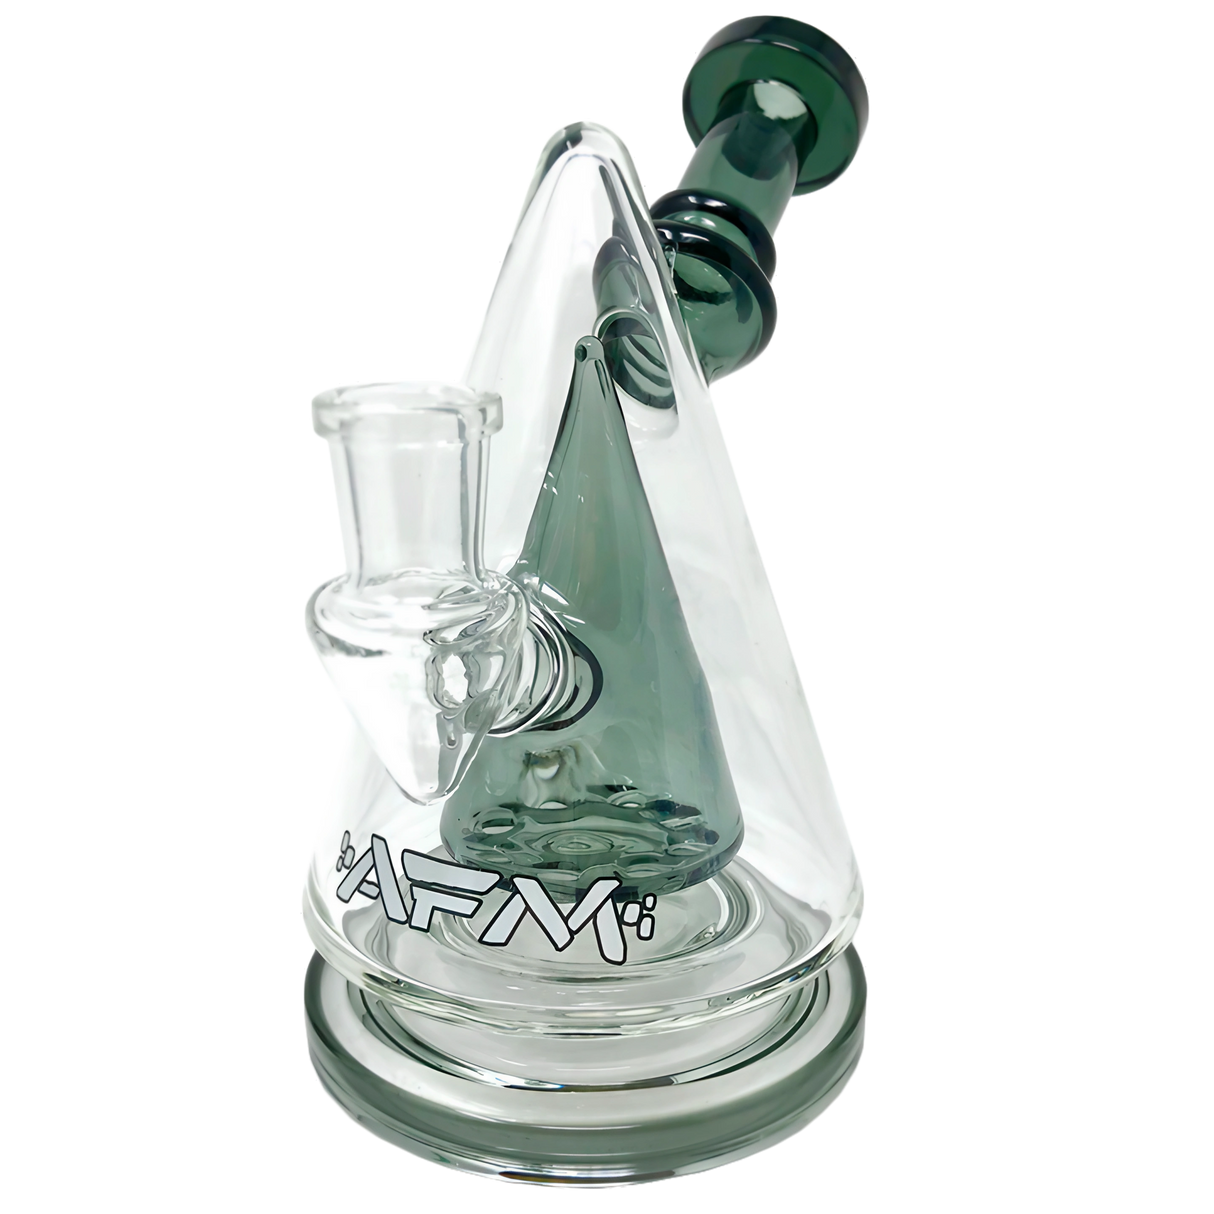 AFM Glass - The Cone Head Rig in Green - 7" Banger Hanger Design with Percolator - Front View